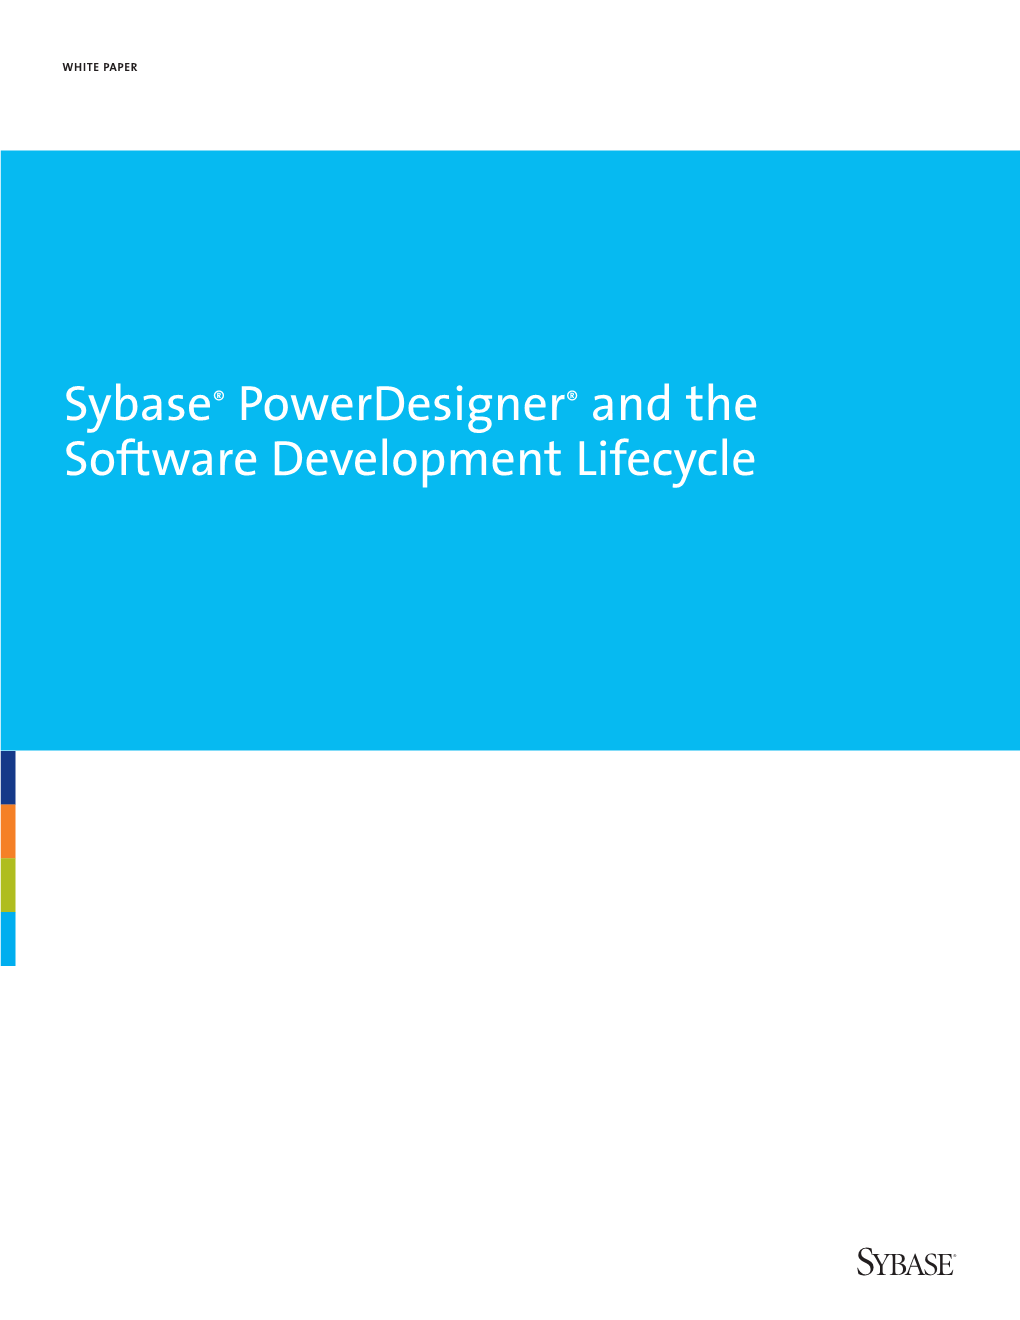 Sybase® Powerdesigner® and the Software Development Lifecycle WHAT IS SYBASE POWERDESIGNER?